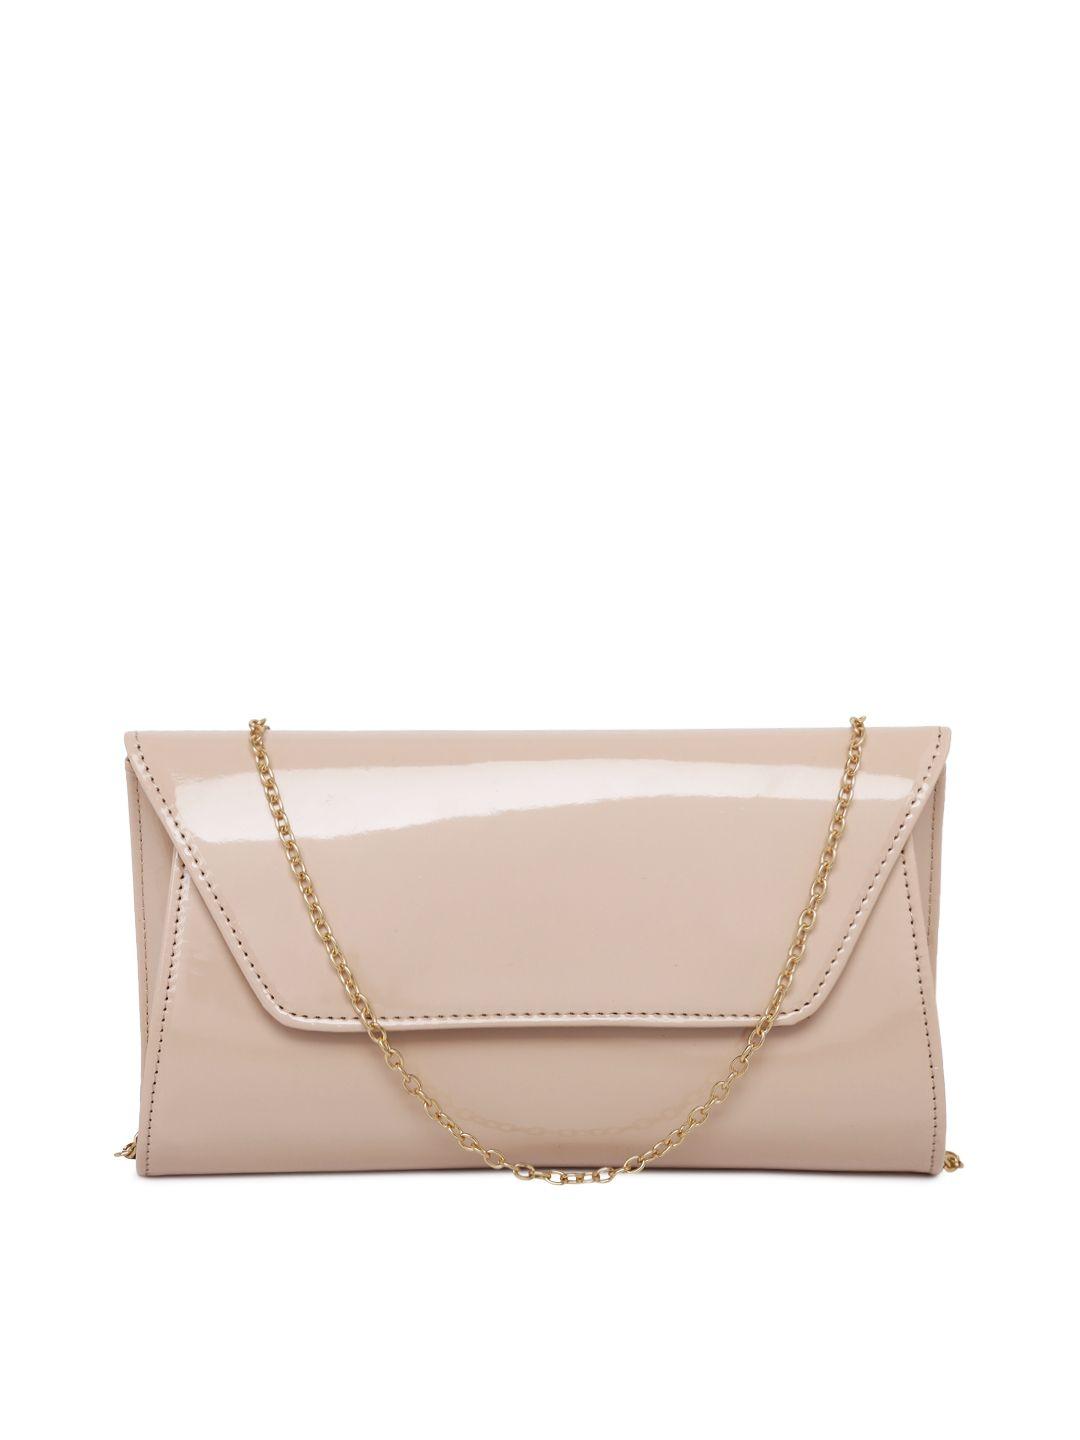 inc 5 nude pink solid clutch